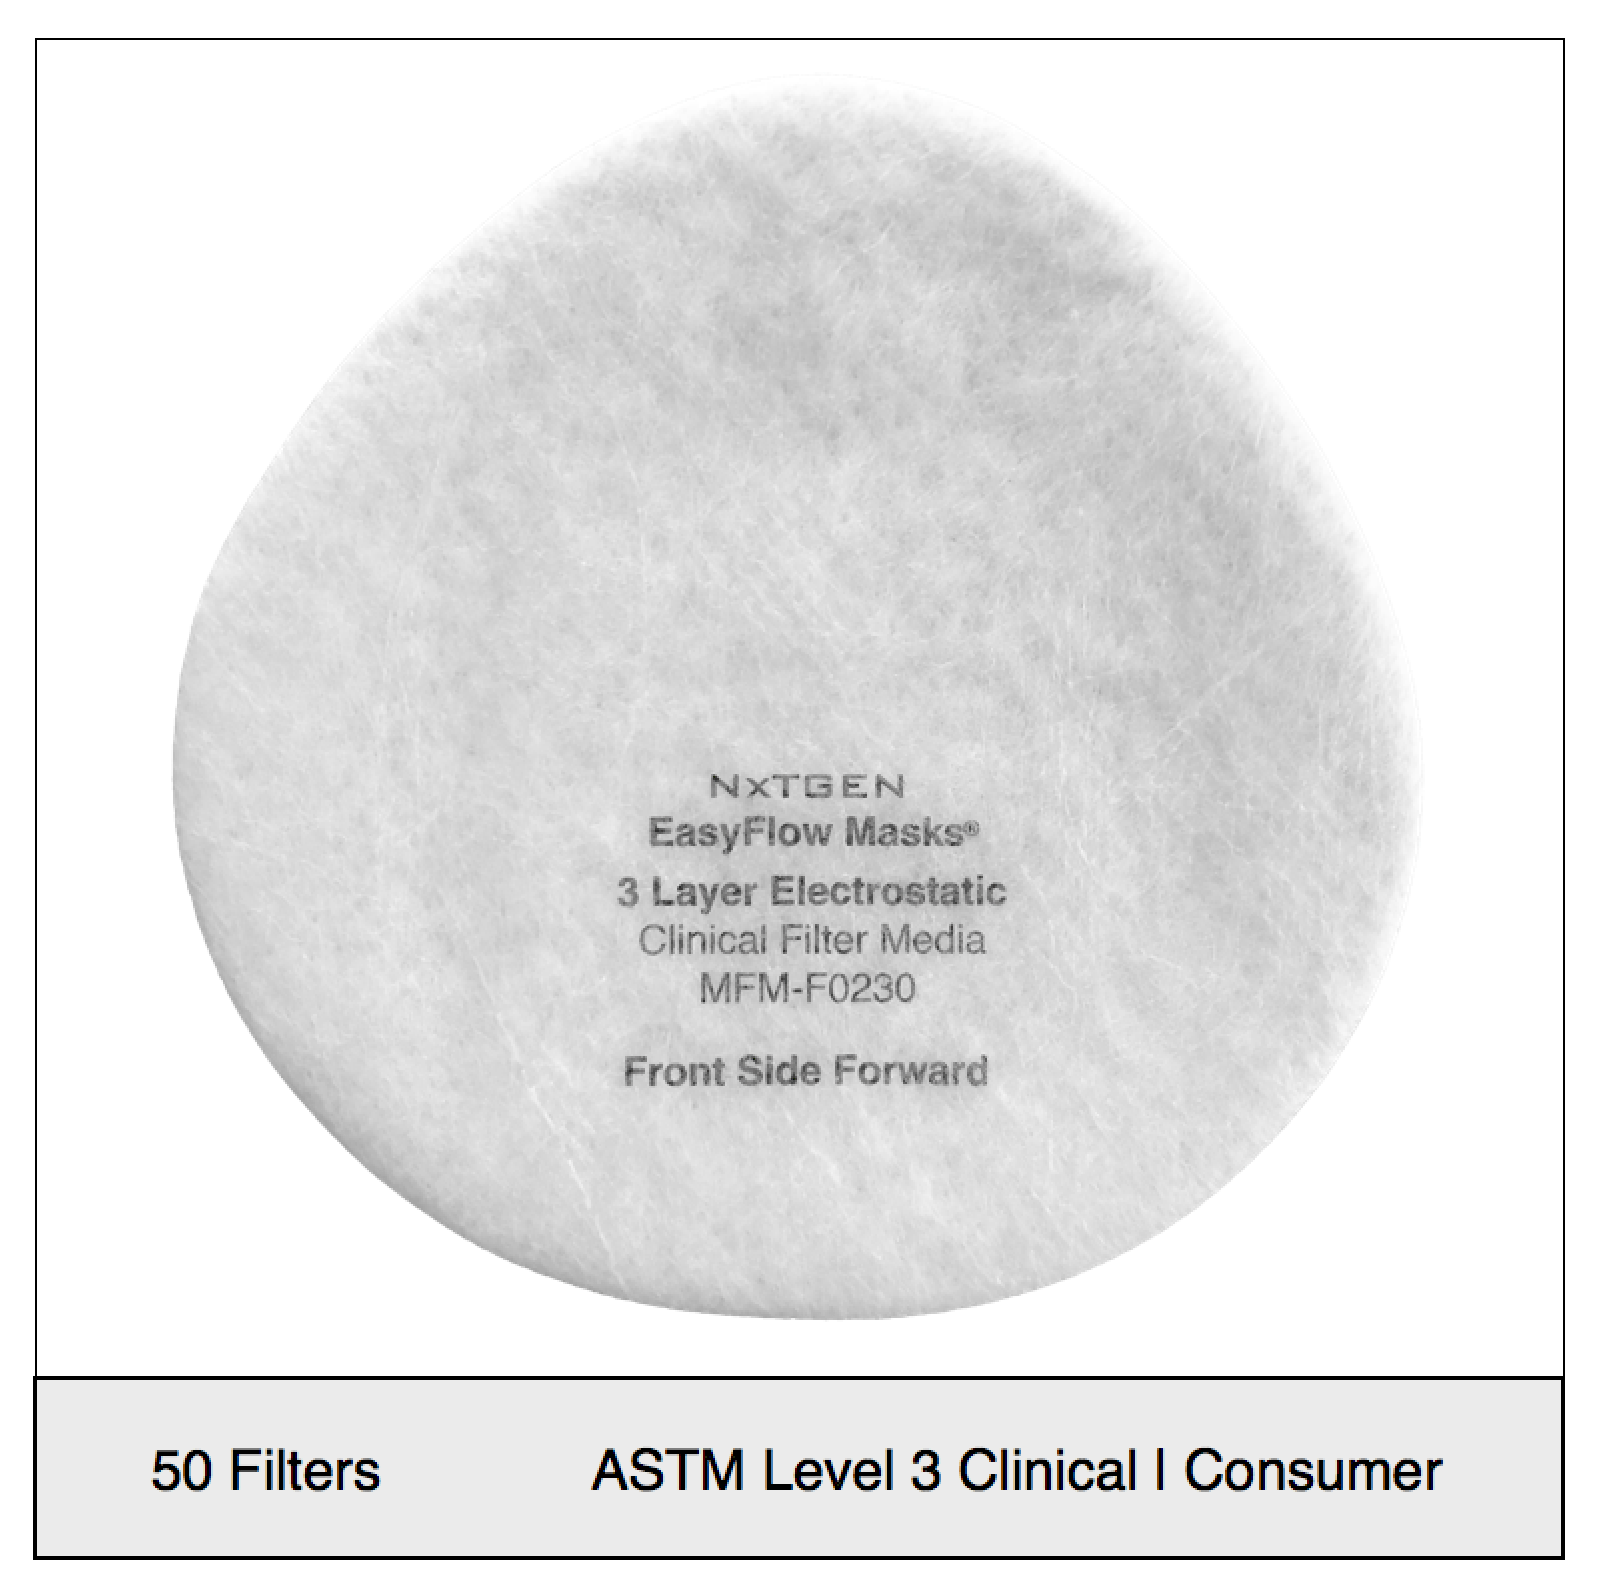 ASTM Level 3 Clinical | Consumer filter Set (50 qty)